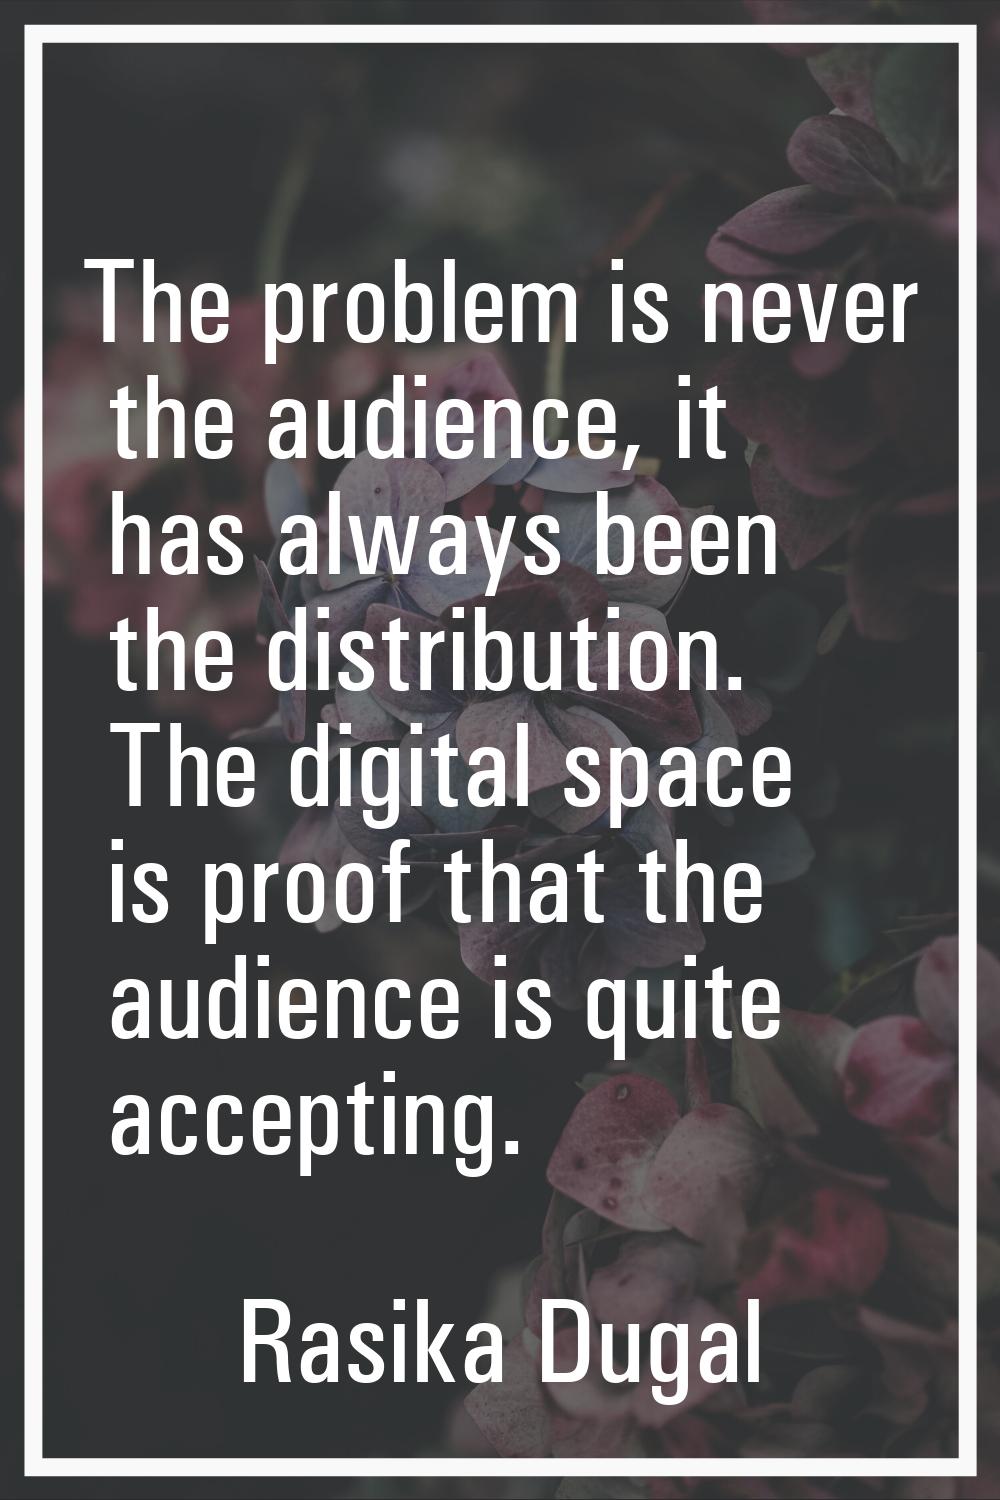 The problem is never the audience, it has always been the distribution. The digital space is proof 